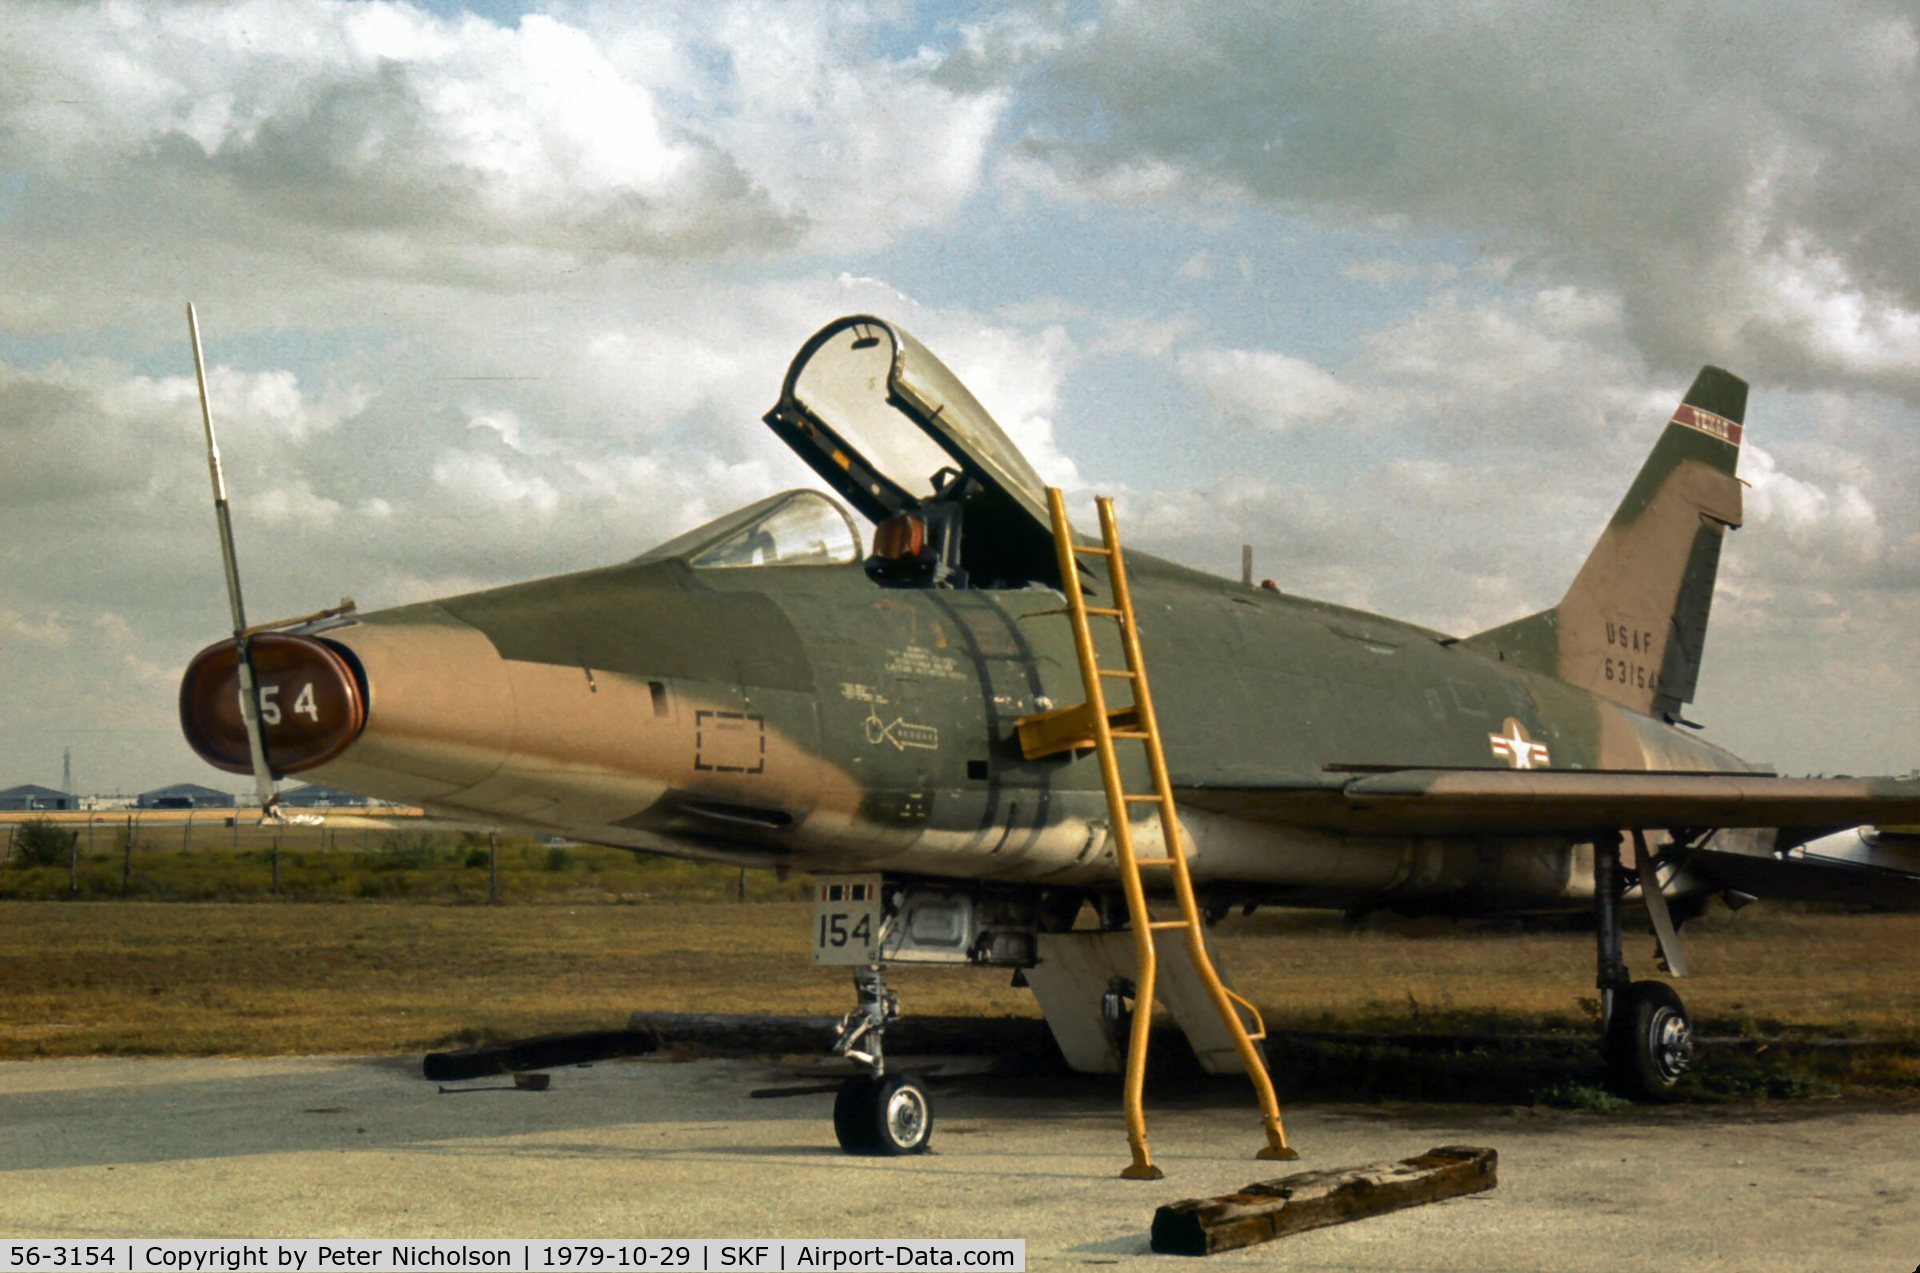 56-3154, 1956 North American F-100D Super Sabre C/N 235-350, F-100D Super Sabre of 182nd Tactical Fighter Squadron at Kelly AFB in October 1979.